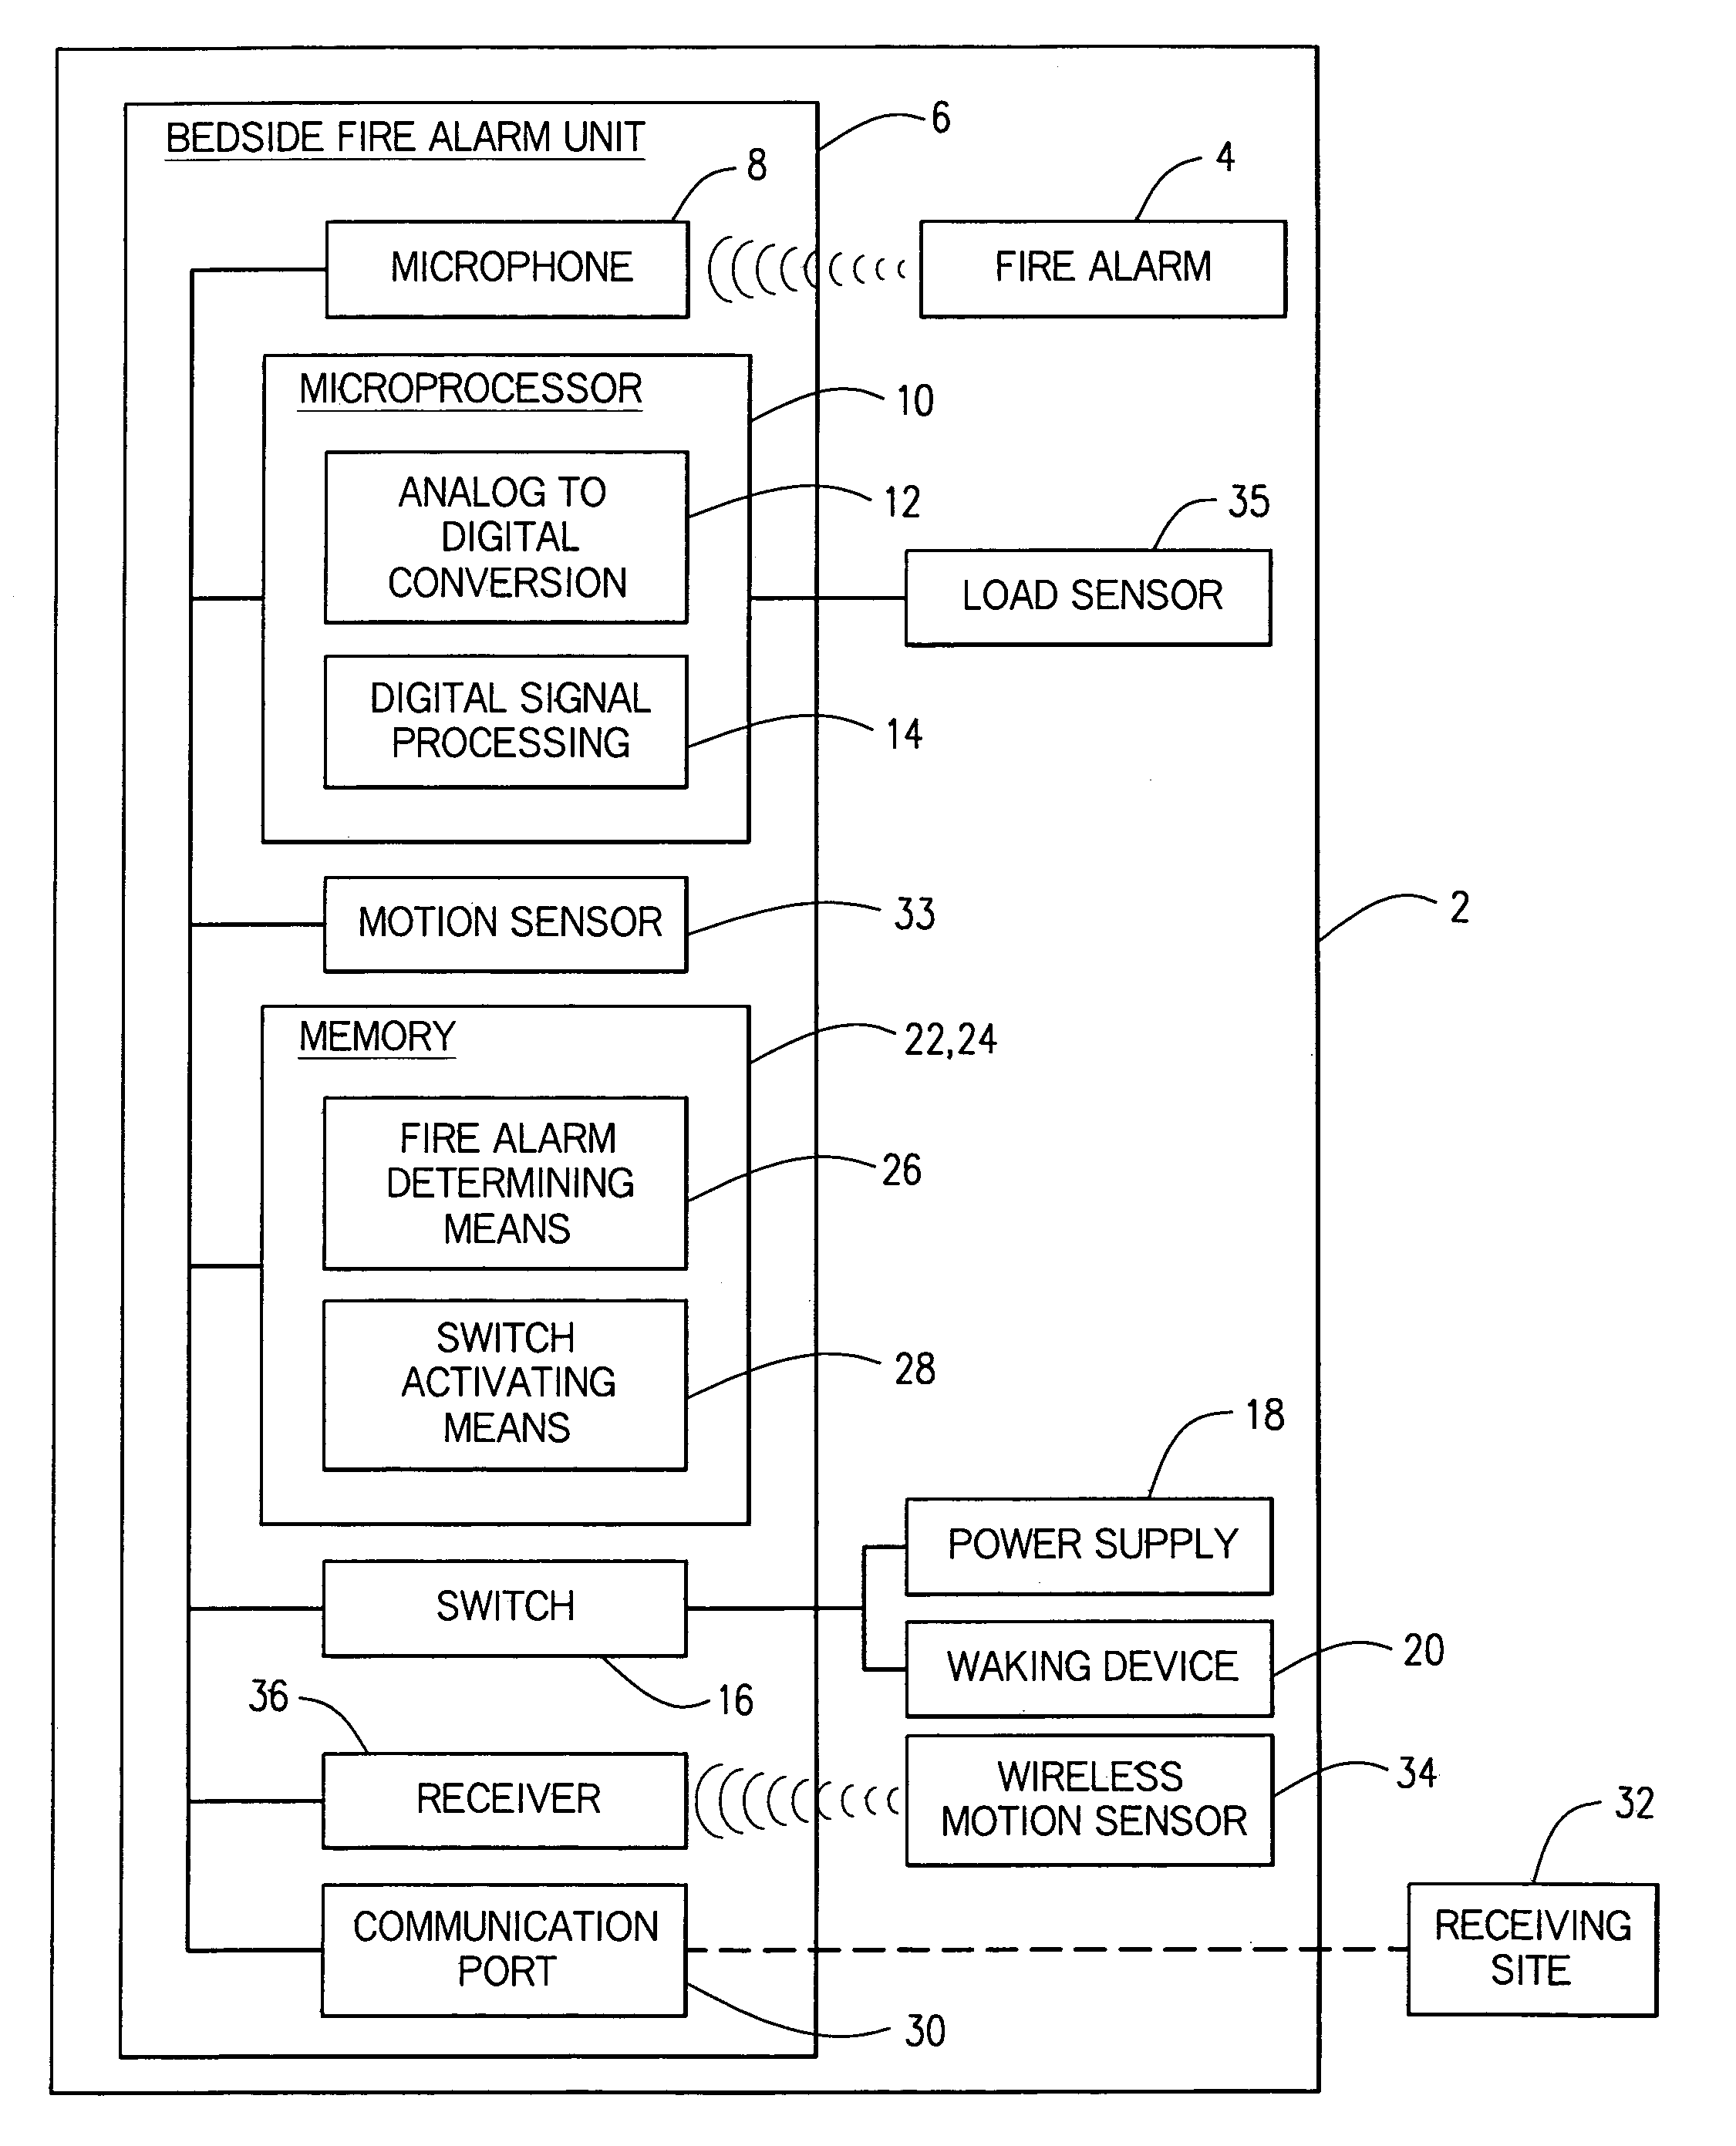 Enhanced fire, safety, security, and health monitoring and alarm response method, system and device